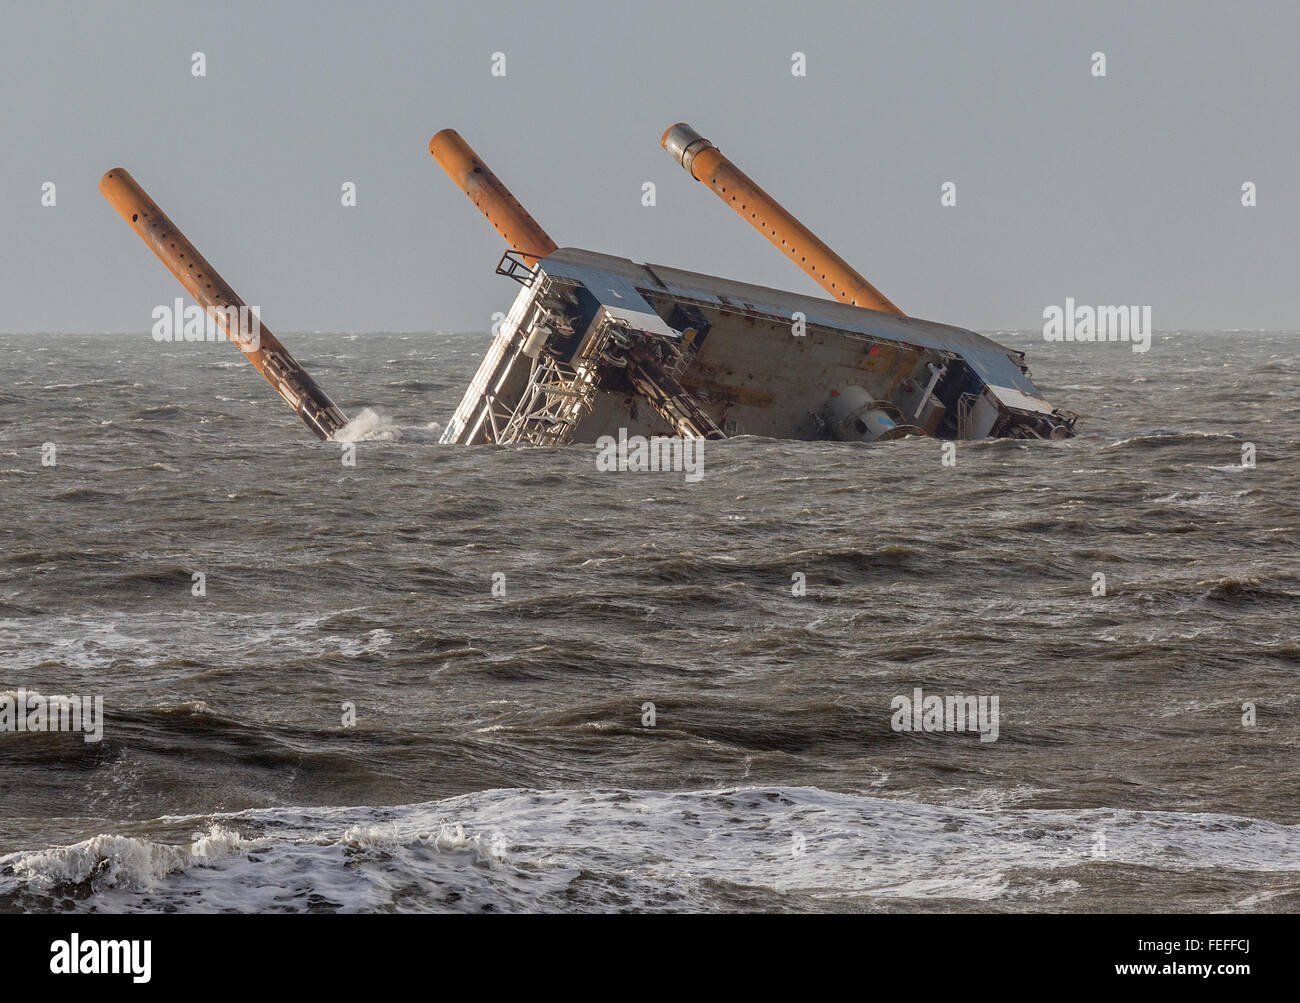 The capsized offshore wind installation and service rig off Nymindegab, Denmark Stock Photo